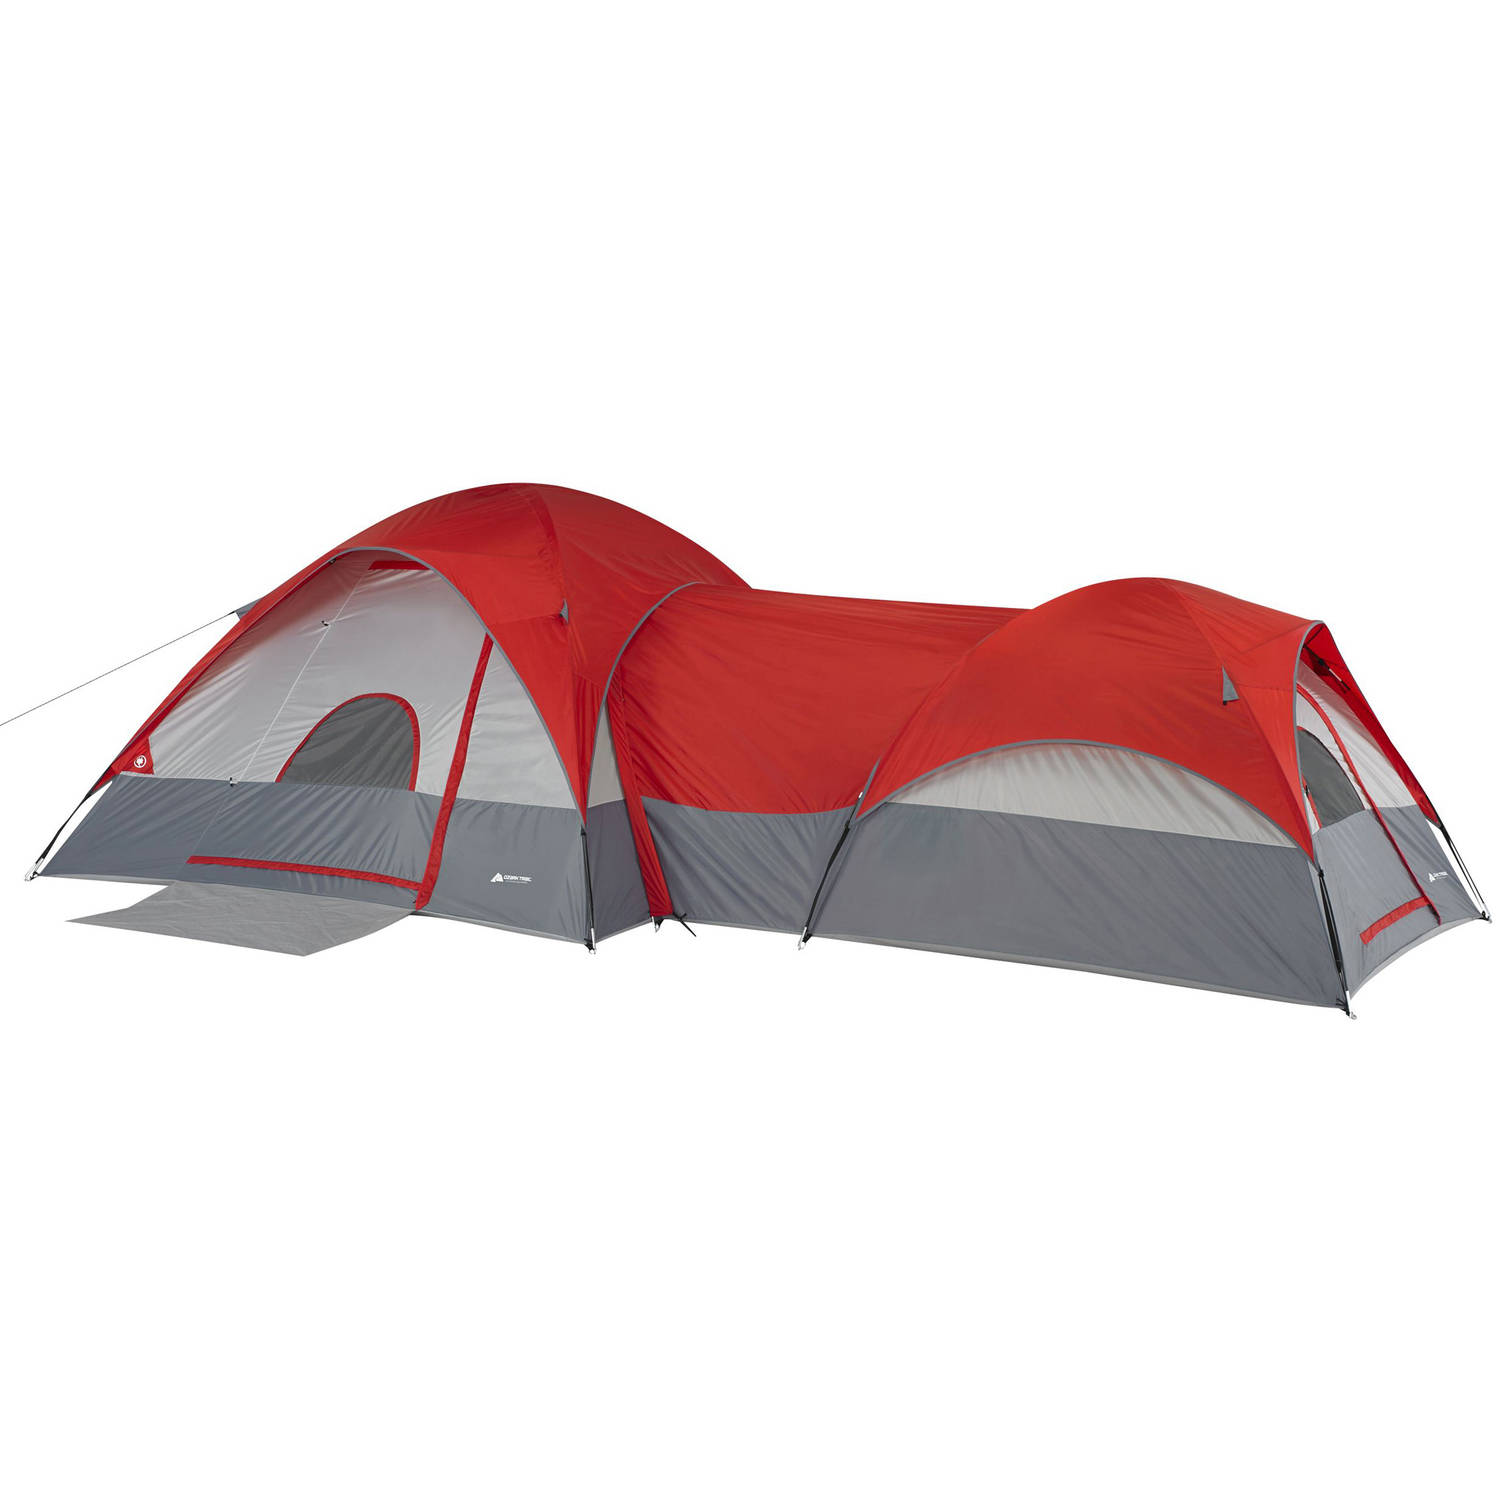 Ozark Trail 8-person dome ConnecTent with tunnel for $63